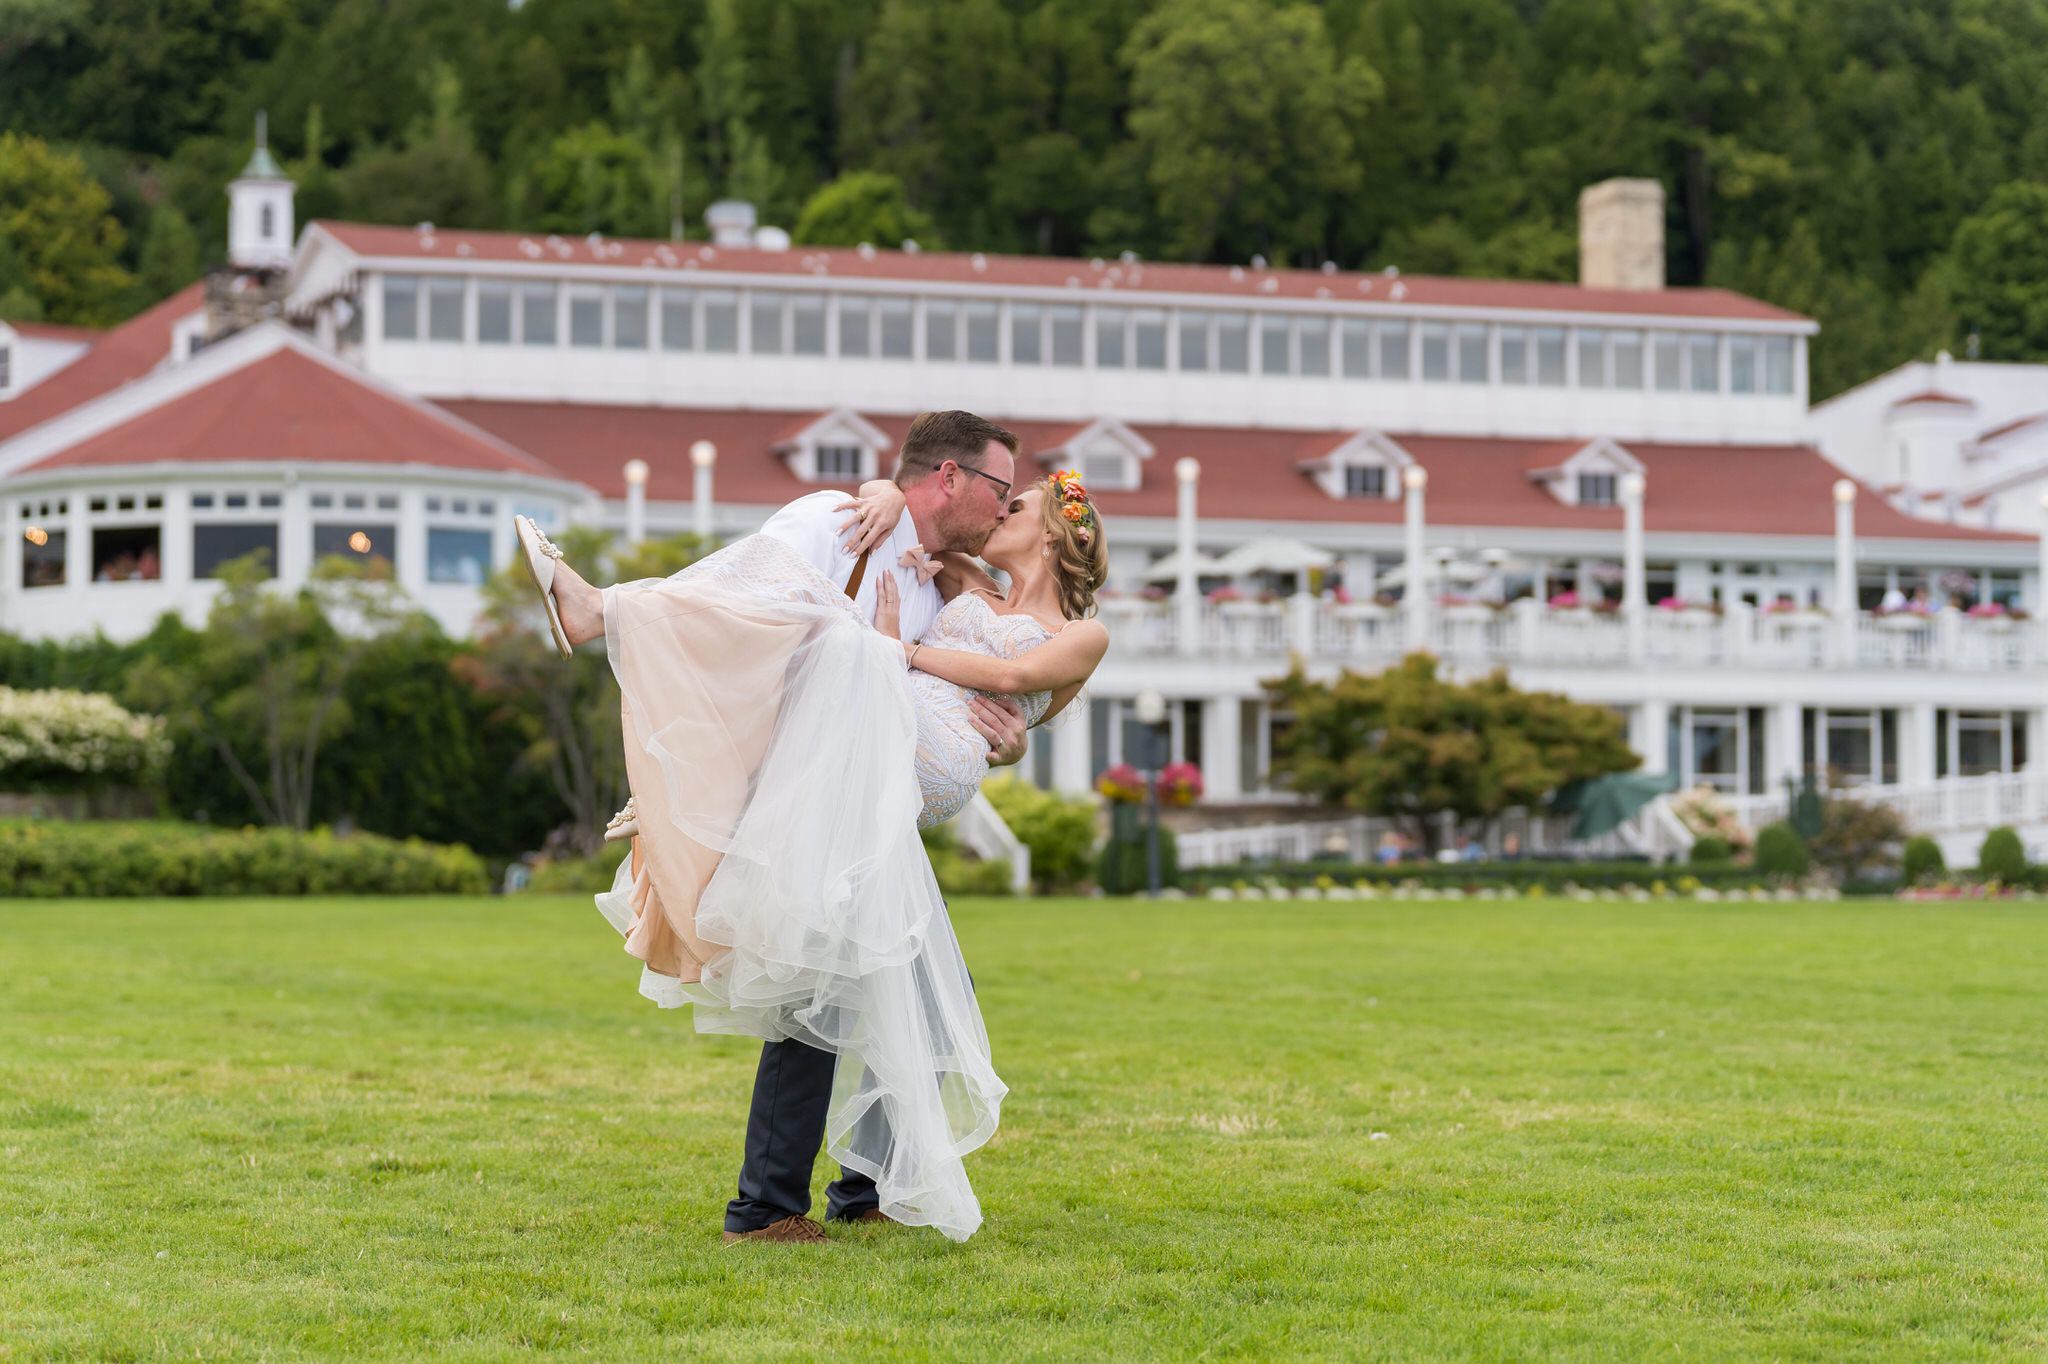 A groom, carrying his bride, kisses her with their Mission Pointe Resort wedding in the background.  